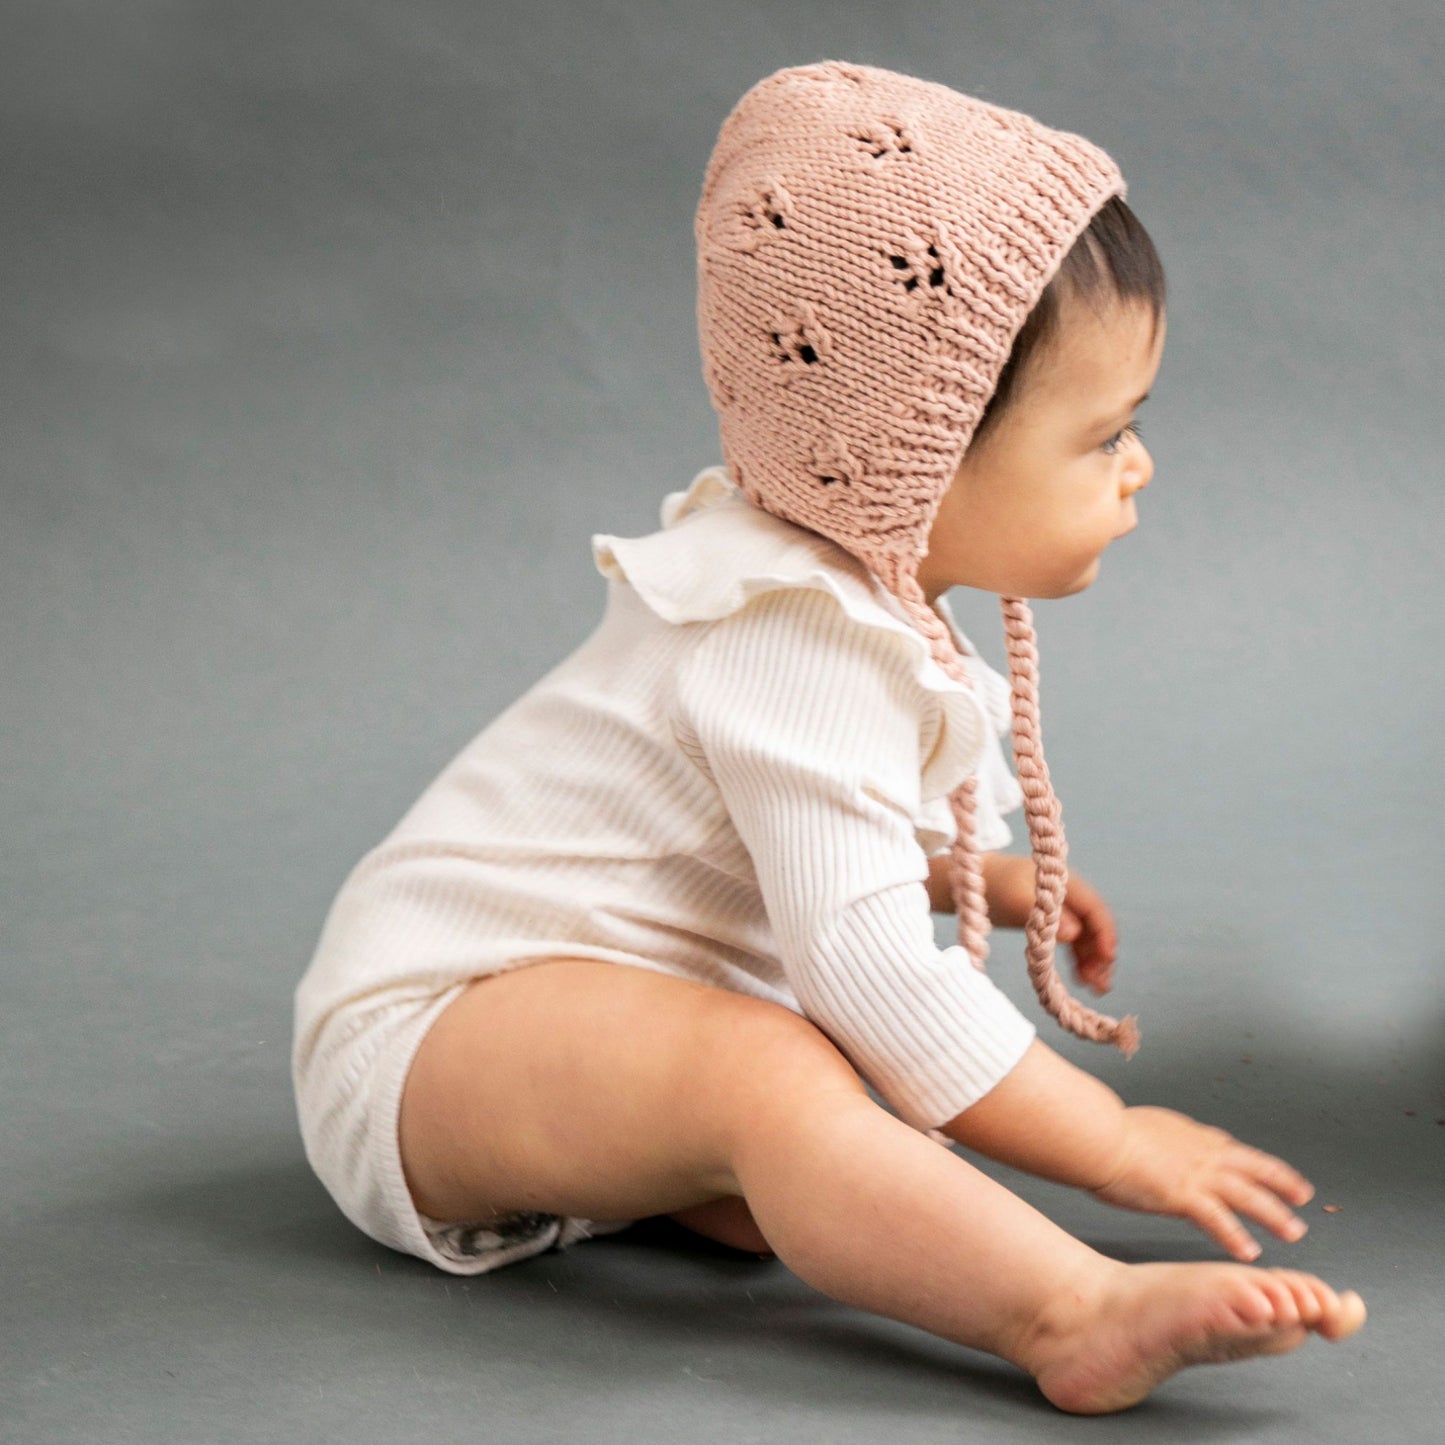 hand knit dusty pink cotton bonnet with openwork stitching and tie closure